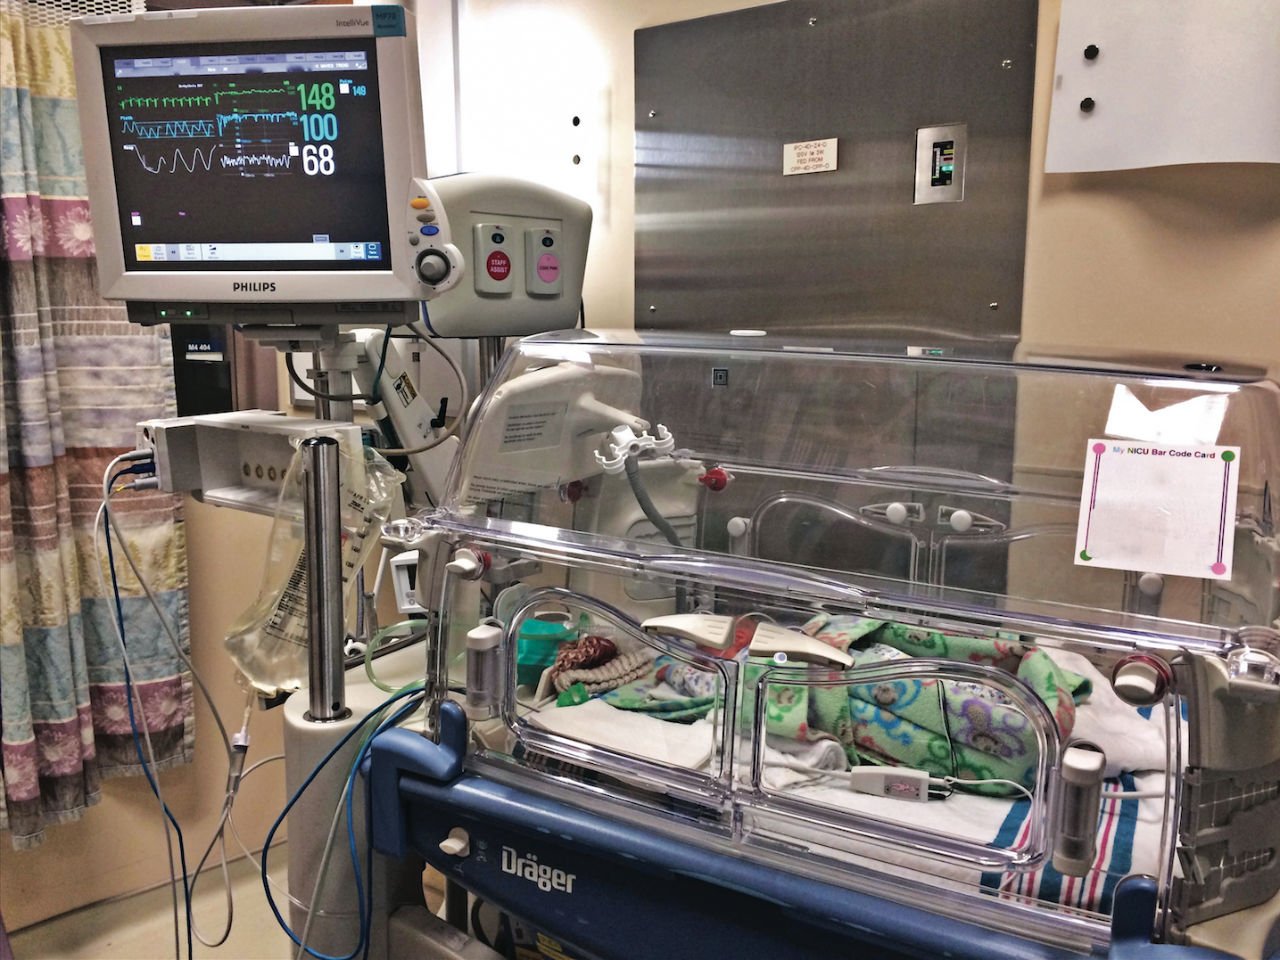 Baby in an incubator with attached monitors and displays in the NICU